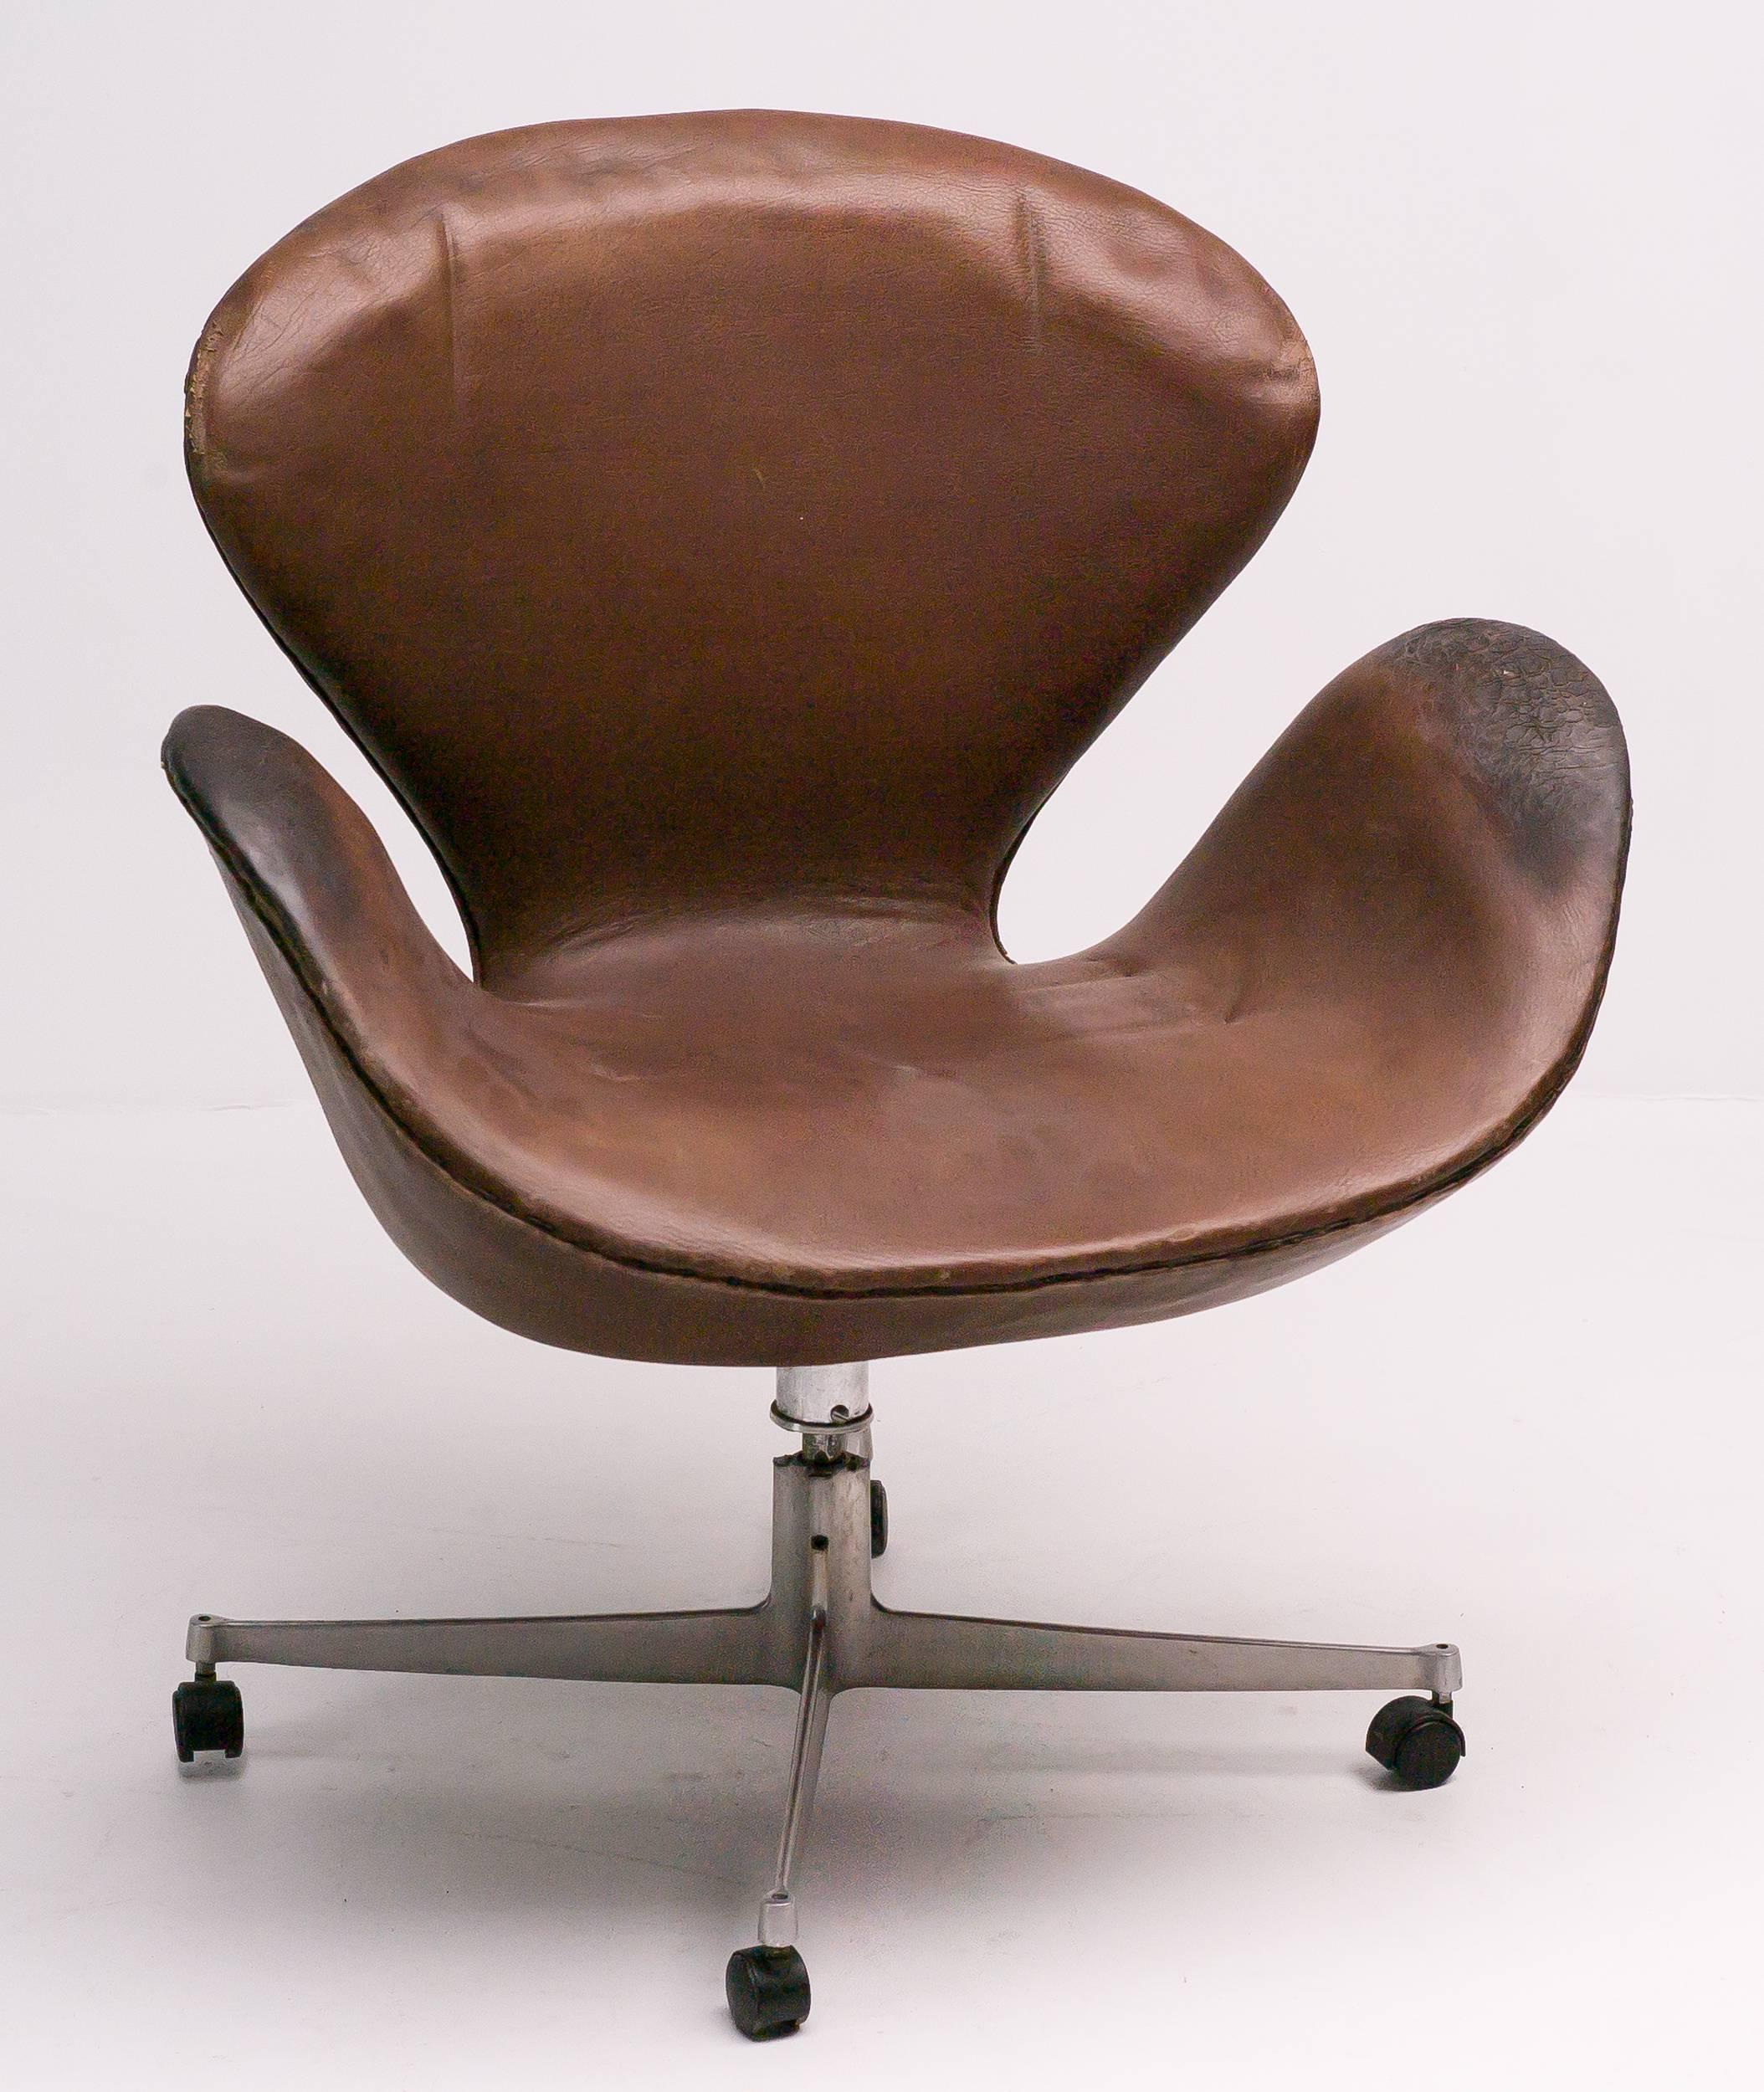 Early very unusual adjustable tilt, swivel or wheels swan chair by Arne Jacobsen.
Marked with silver Fritz Hansen label.
Original leather upholstery, that is in fair condition.
The chair is useable as is, but is more a collector or museum